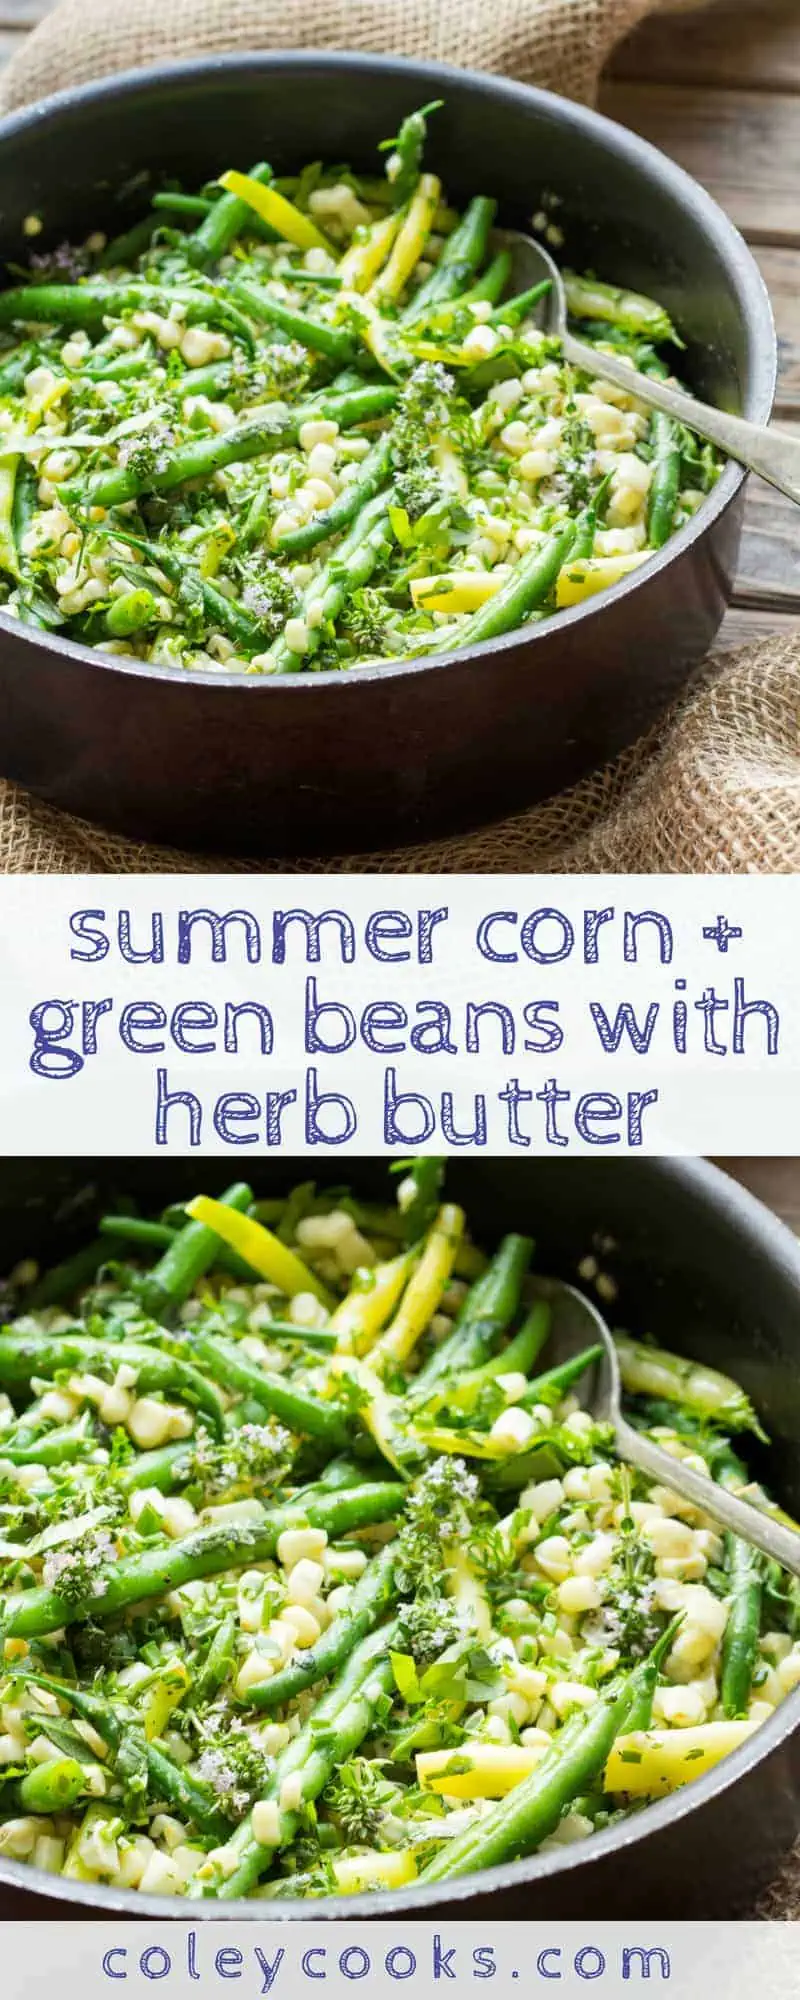 SUMMER CORN + GREEN BEANS with HERB BUTTER | Easy summer side dish recipe great with grilled summer dinners. Great use of seasonal vegetables! #recipe #sides #summer #vegetarian #corn | ColeyCooks.com